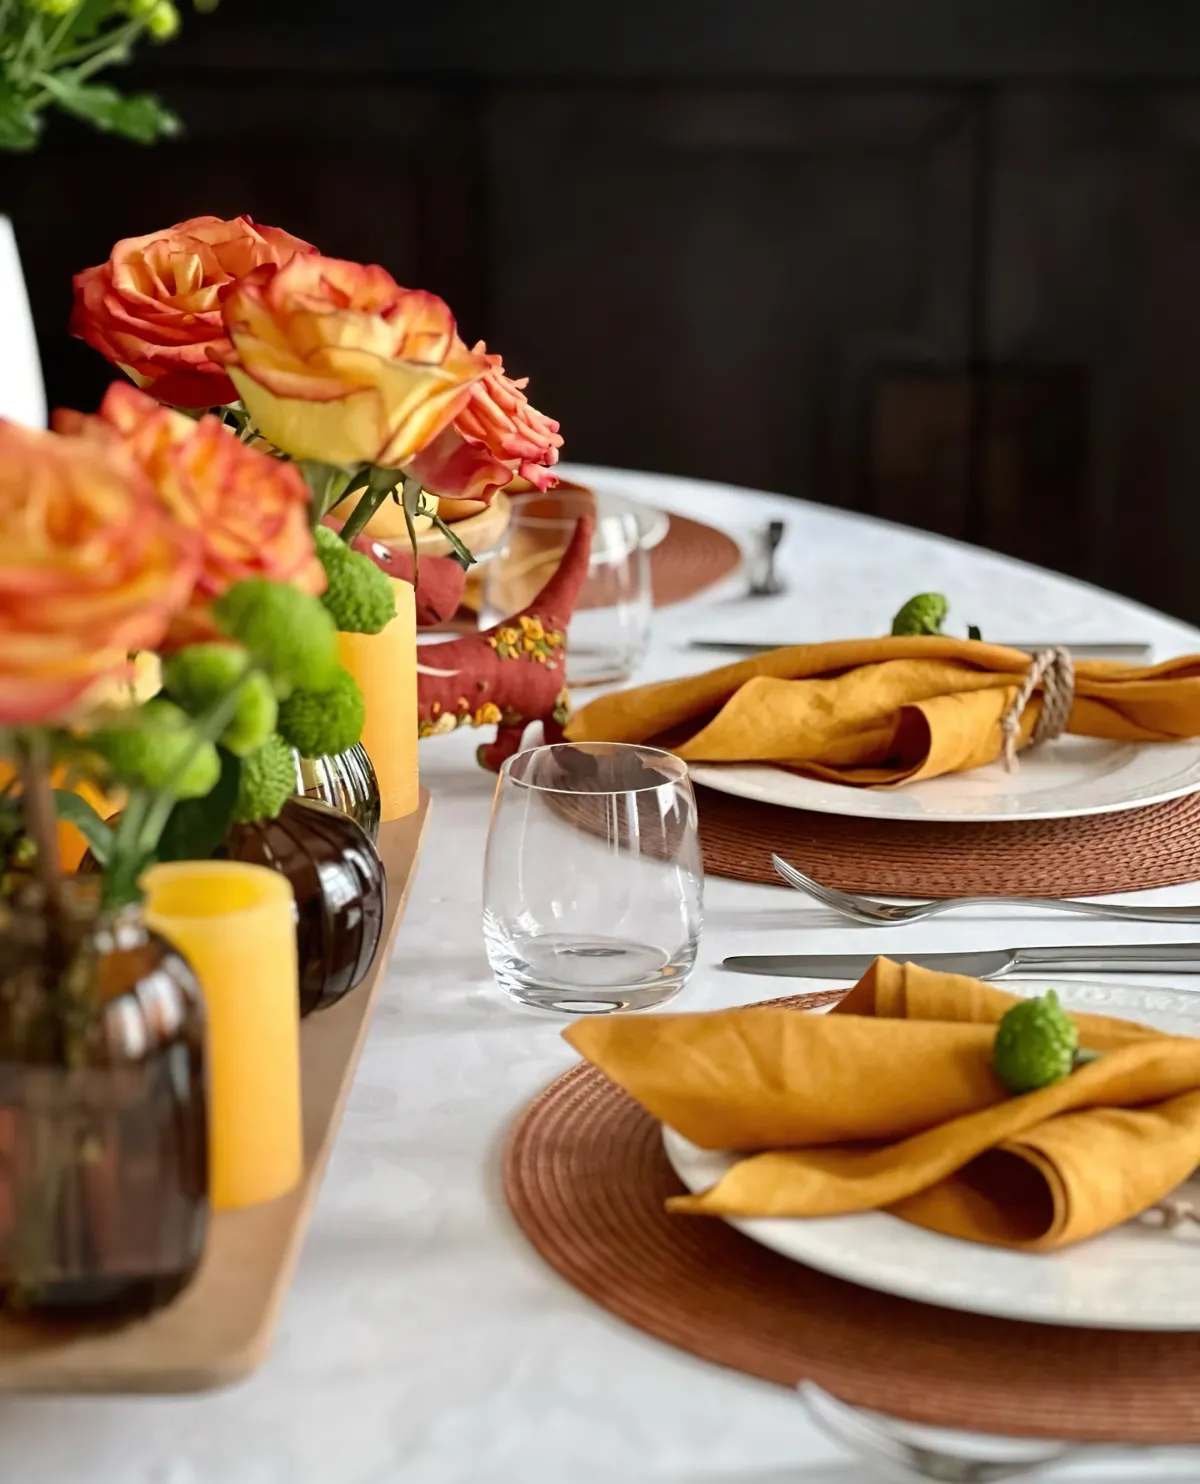 Dining Table Decorations Linen napkins in small glass vases in yellow roses